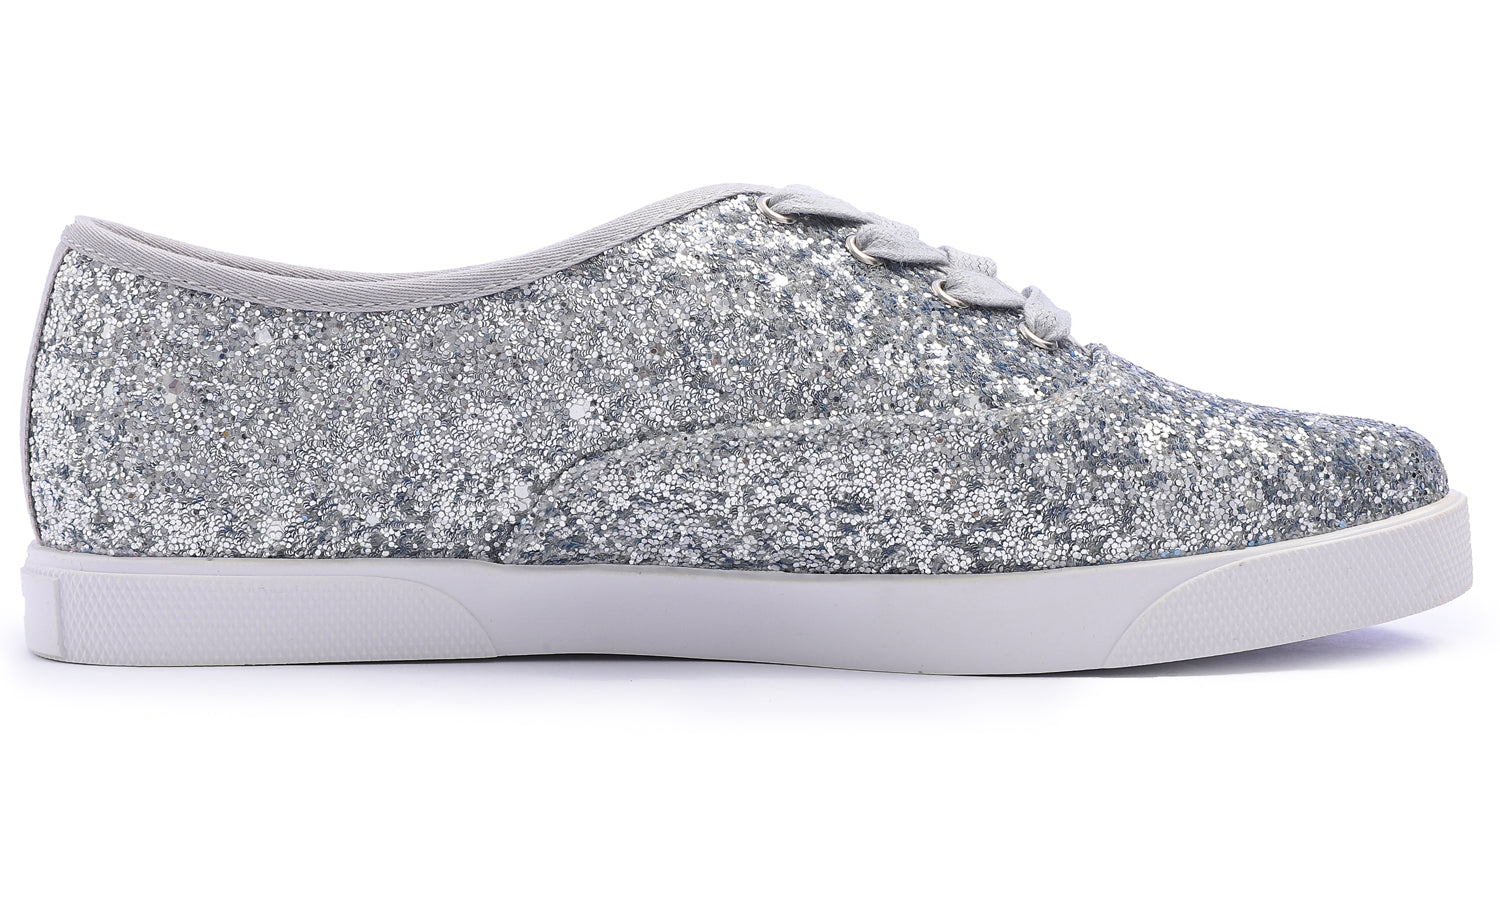 Feversole Women's Fashion Dress Sneakers Party Bling Casual Flats Embellished Shoes Silver Plimsolls Glitter Lace